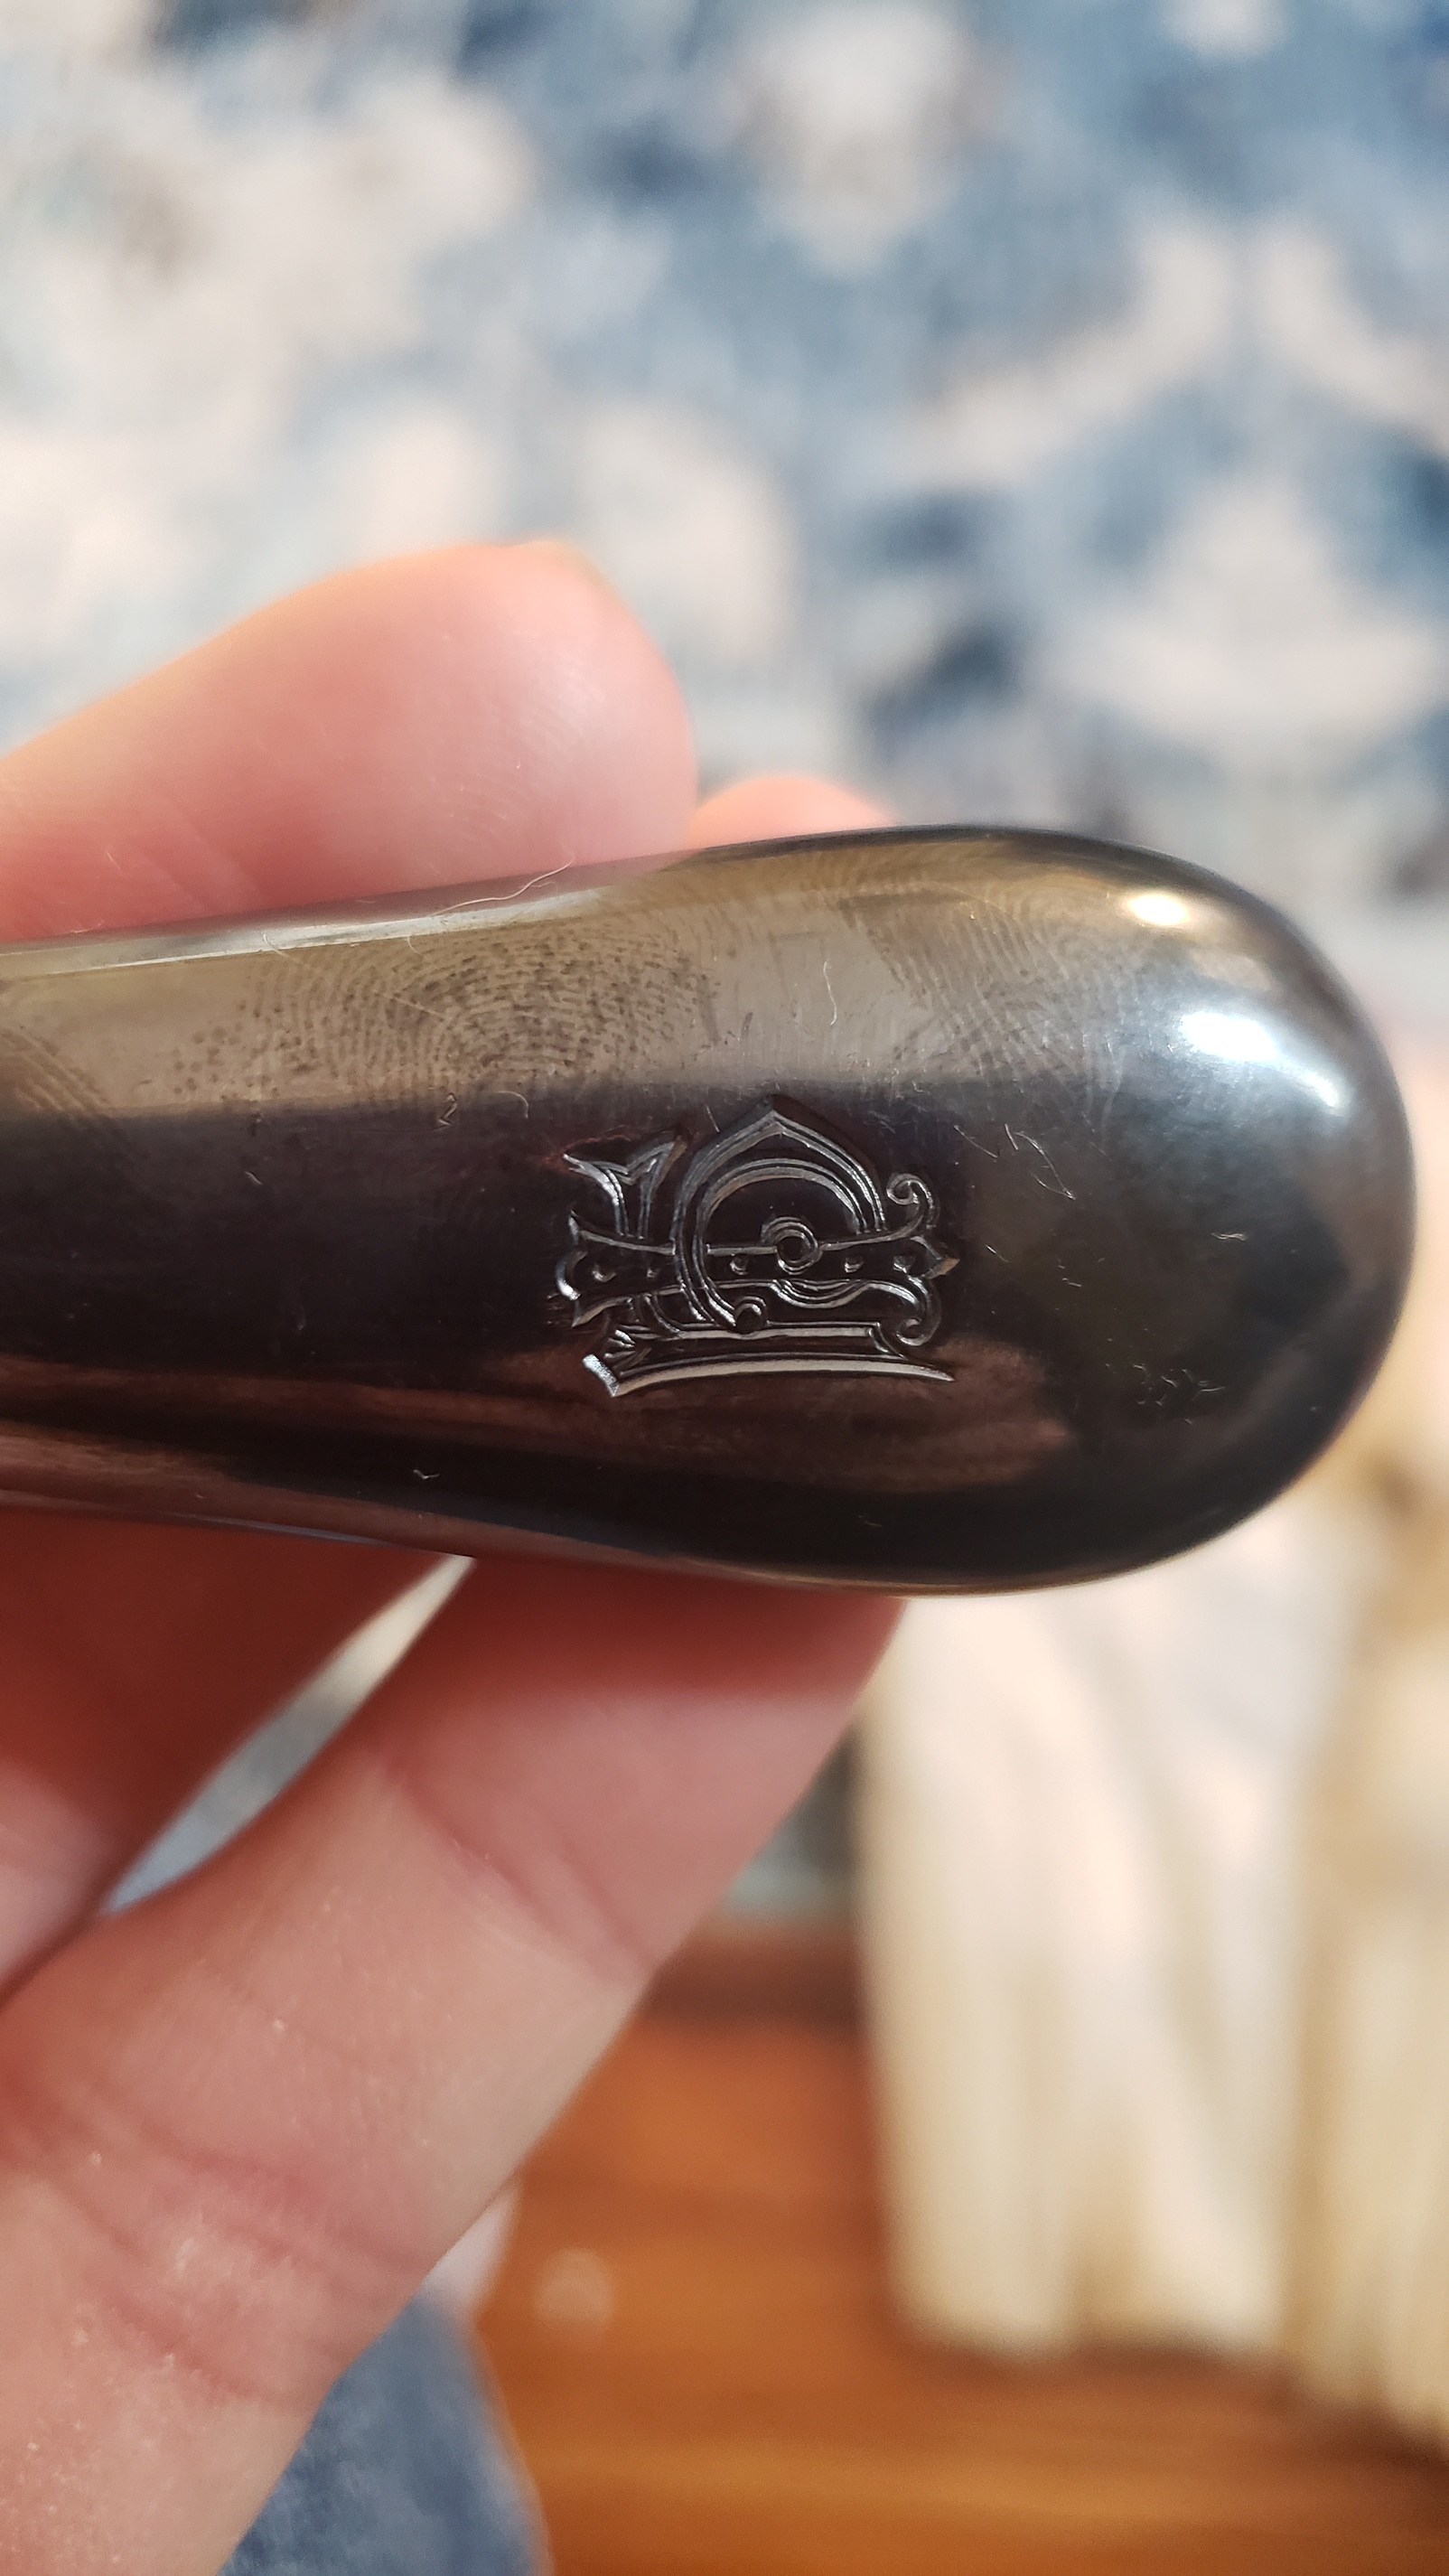 Makers mark....cannot find - Silver Collector Forums